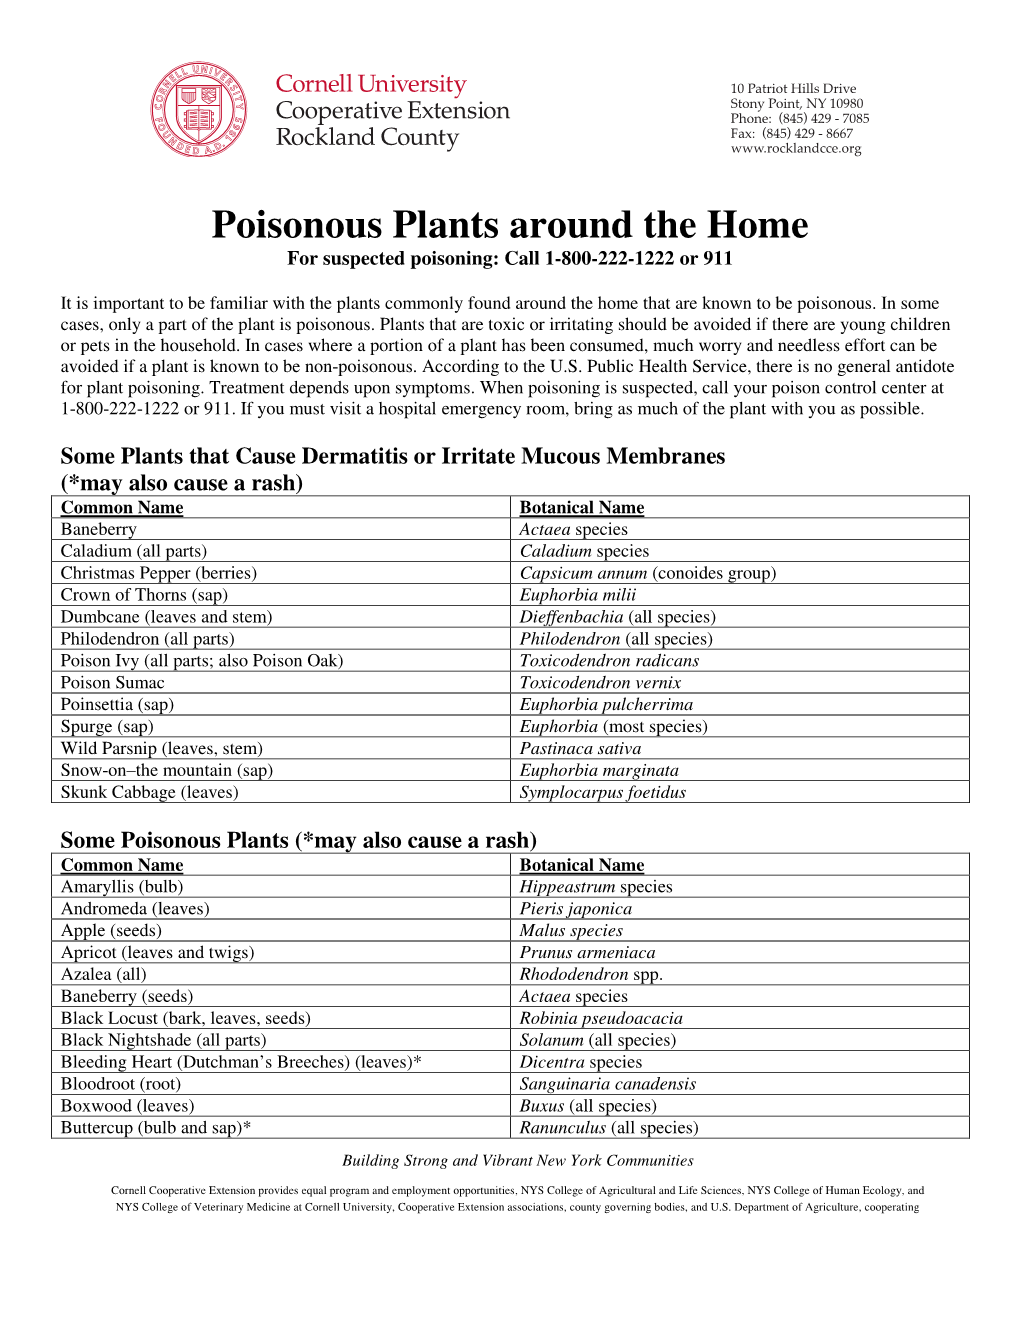 Poisonous Plants Around the Home for Suspected Poisoning: Call 1-800-222-1222 Or 911